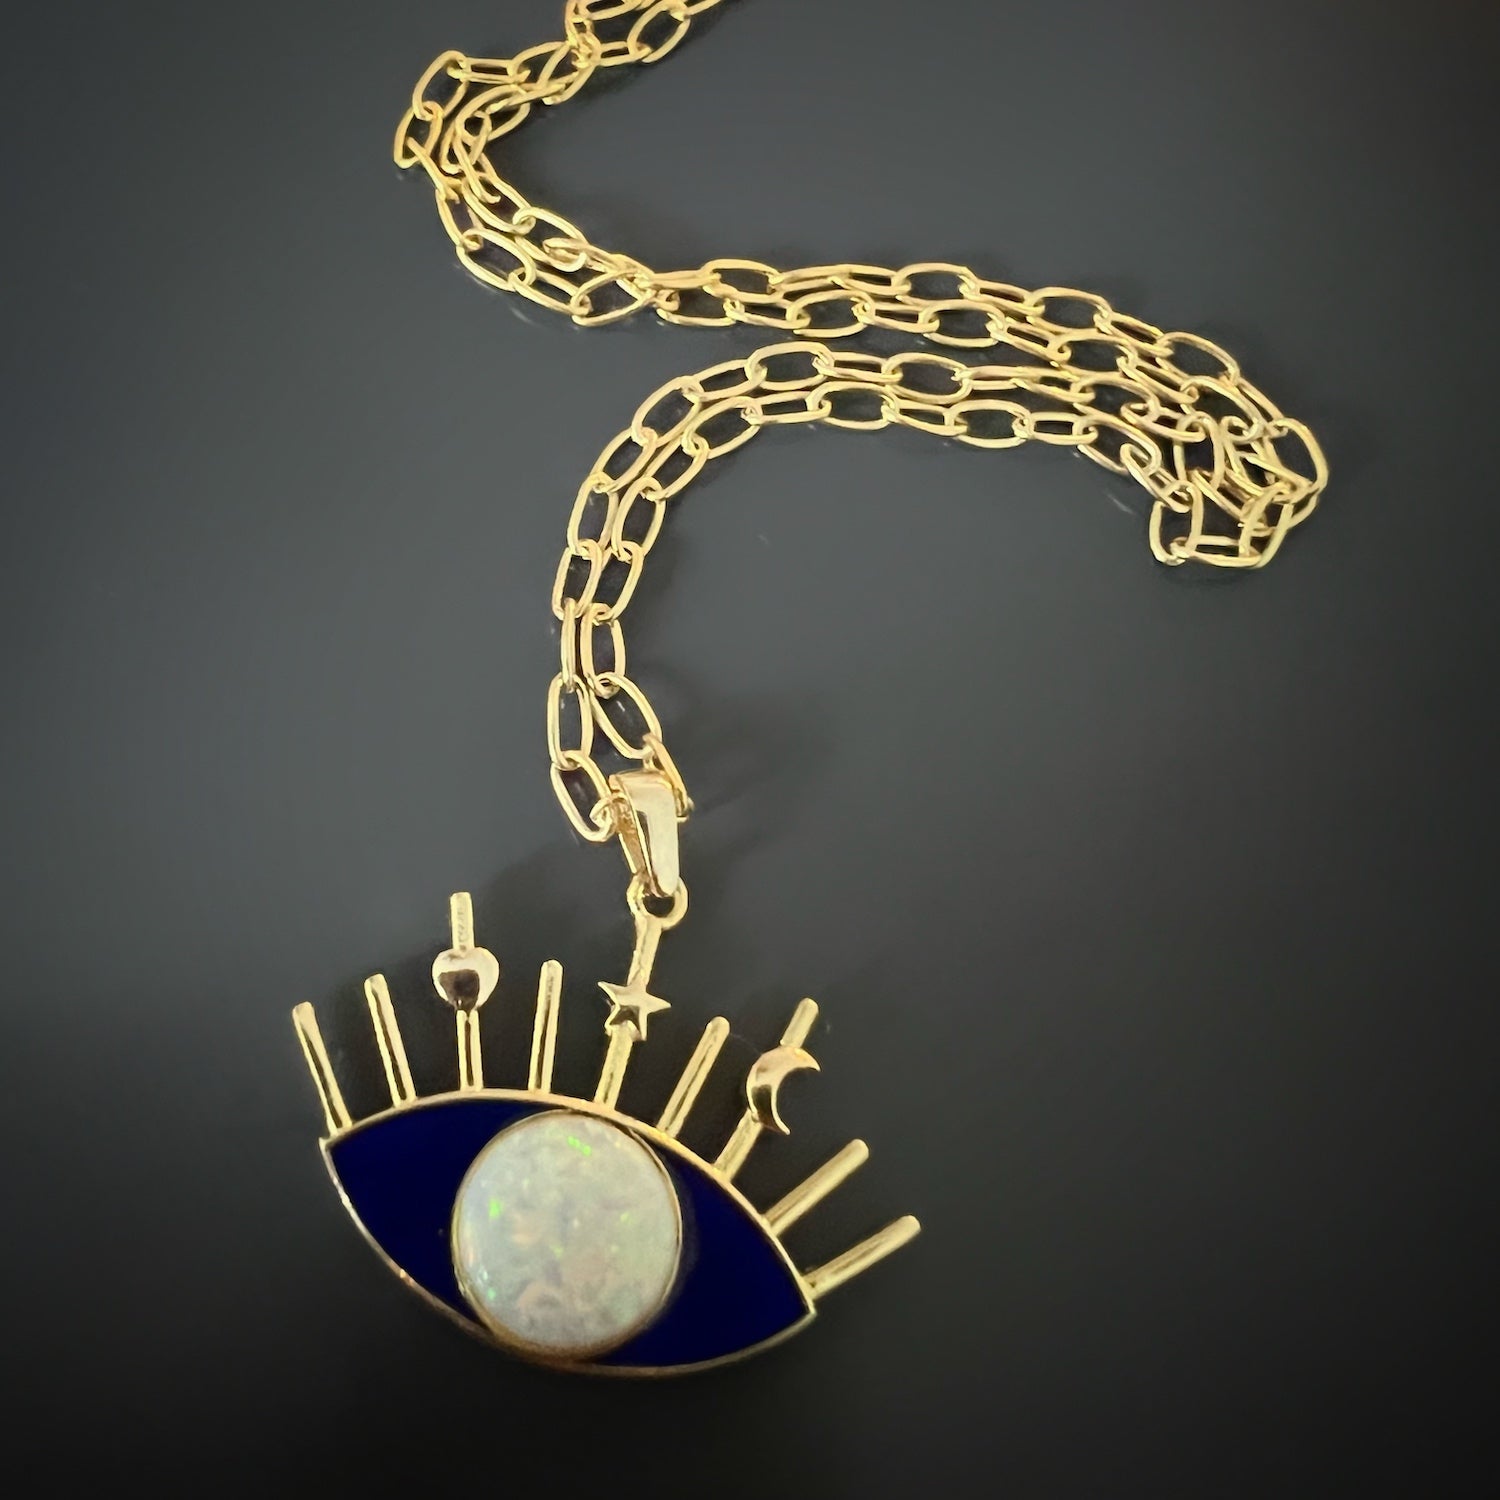 A detailed shot of the captivating Evil Eye pendant on the Opal Blue Evil Eye Necklace.